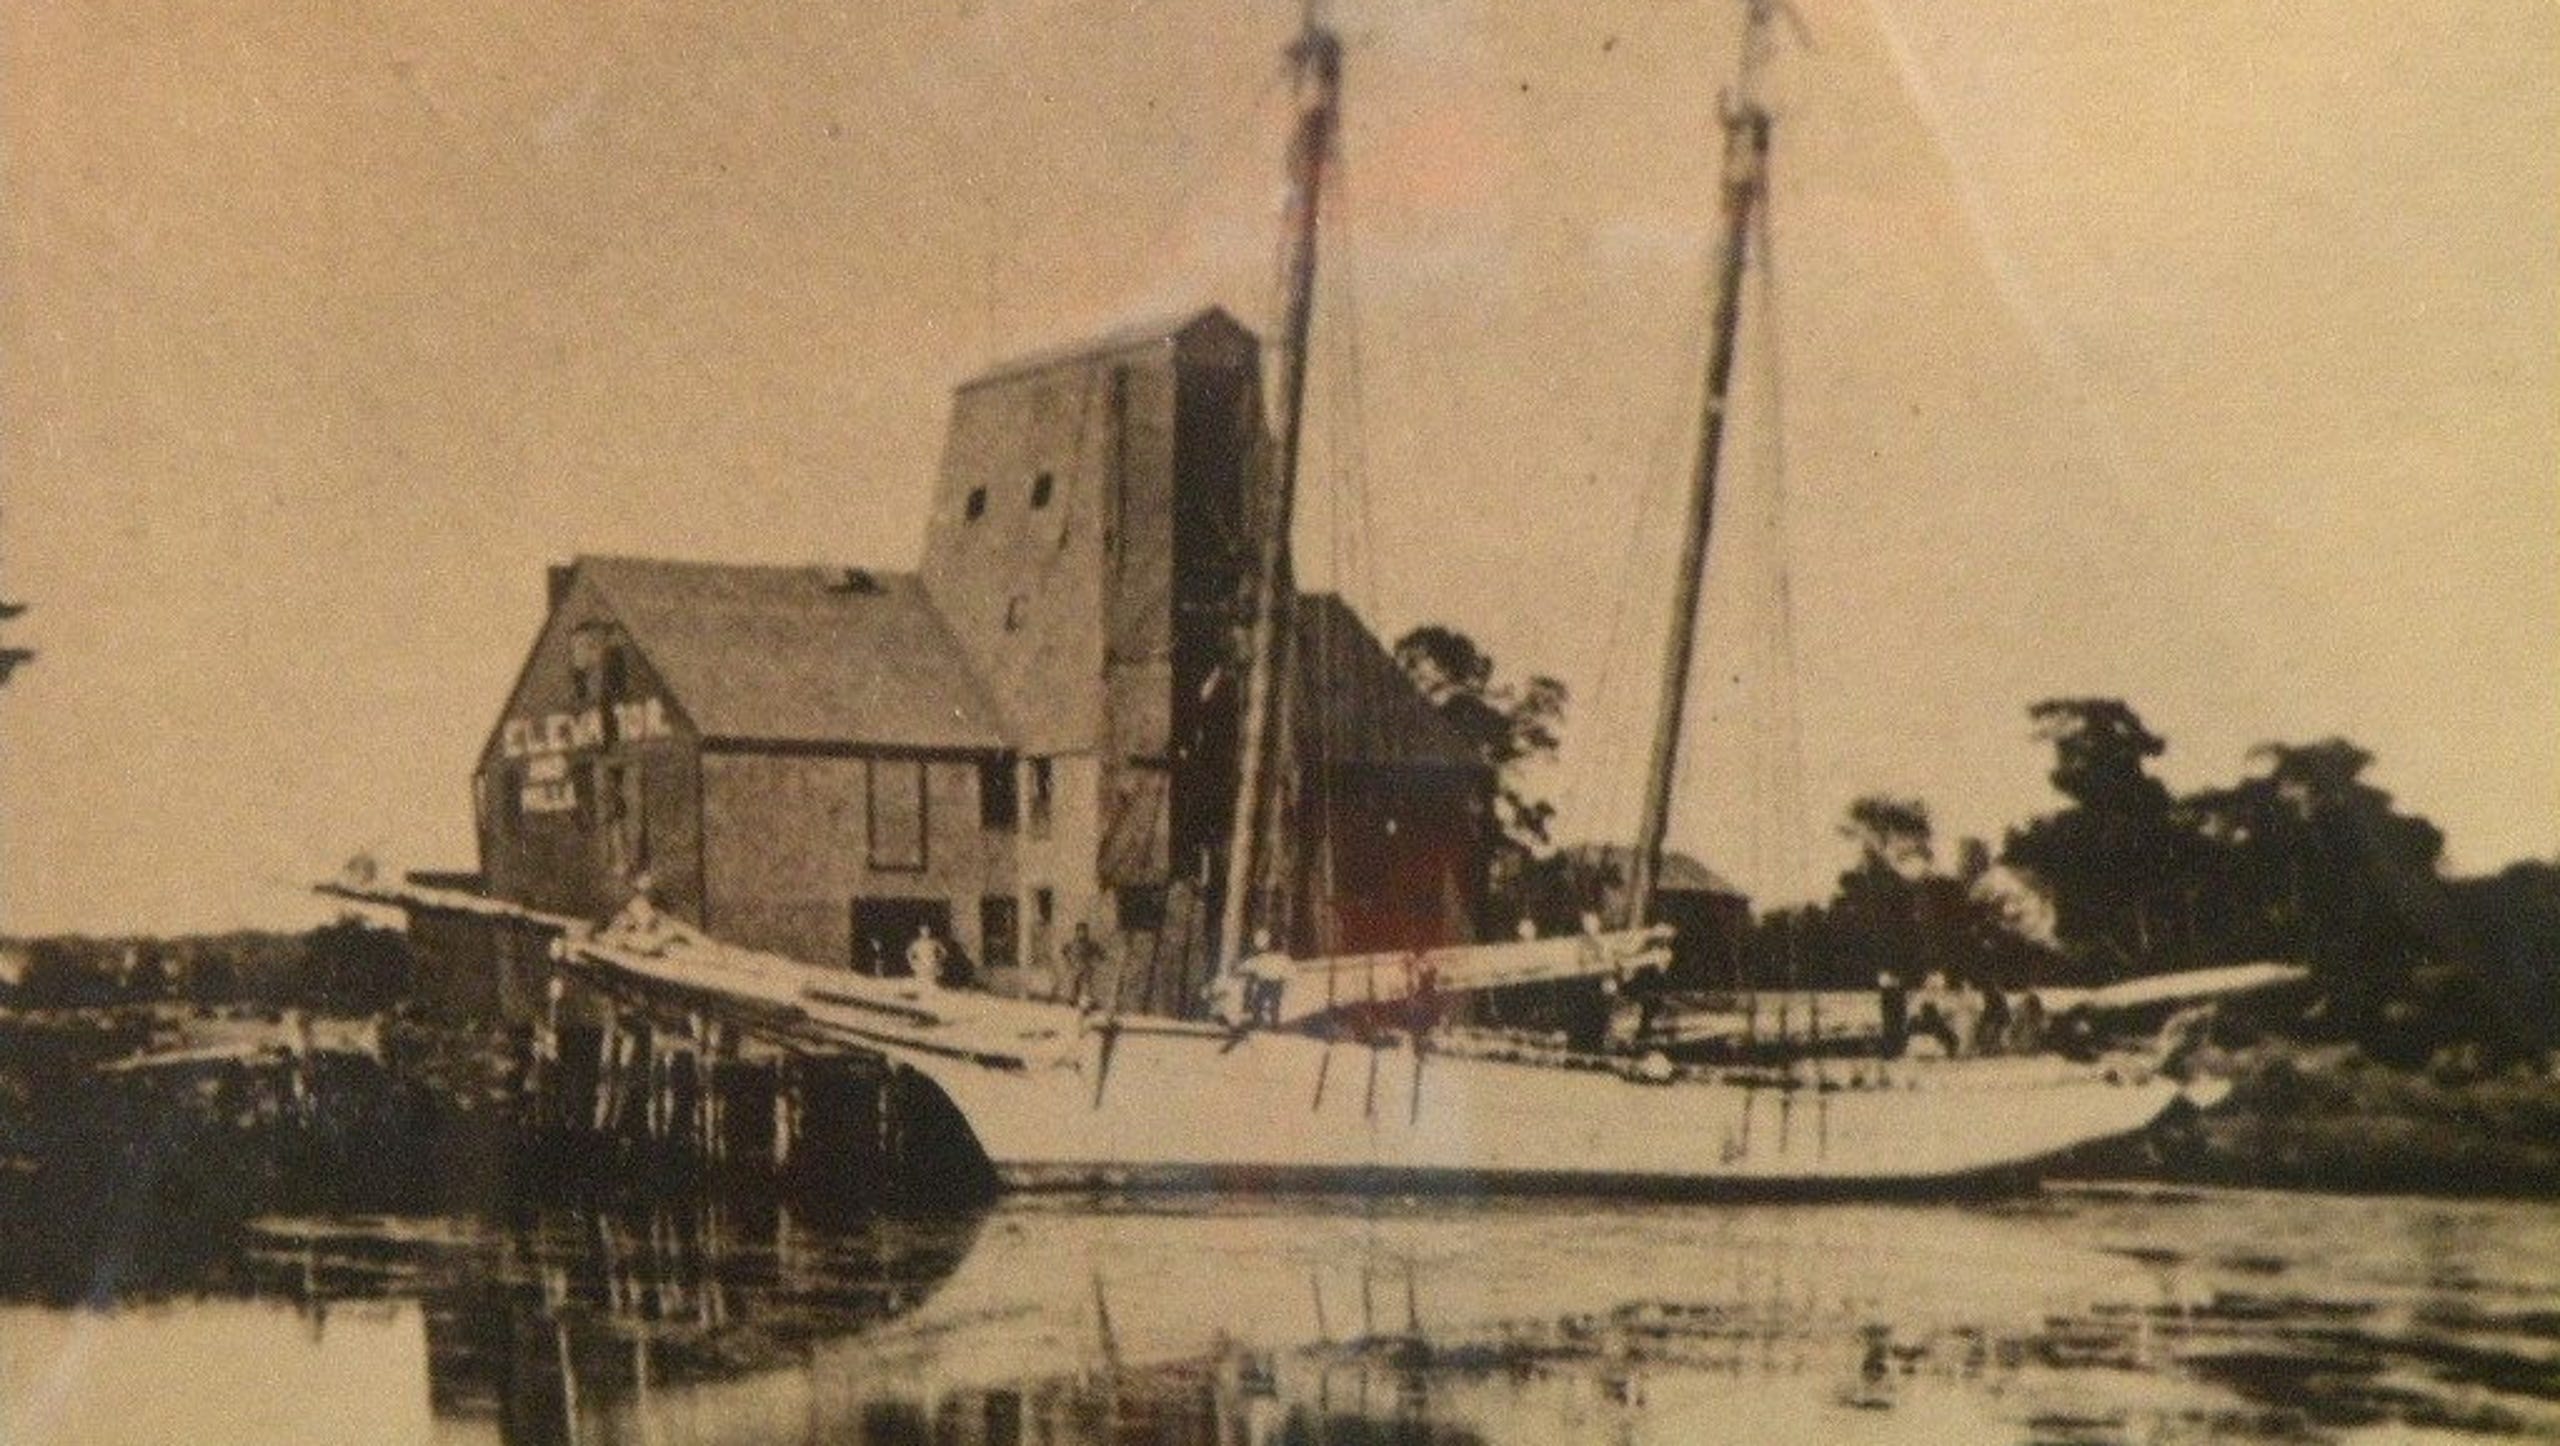 This 1880 photo shows the Friend Tide Mill on the Bass River. The mill processed grain brought to the location by ship. Photo courtesy of Beverly Historical Society